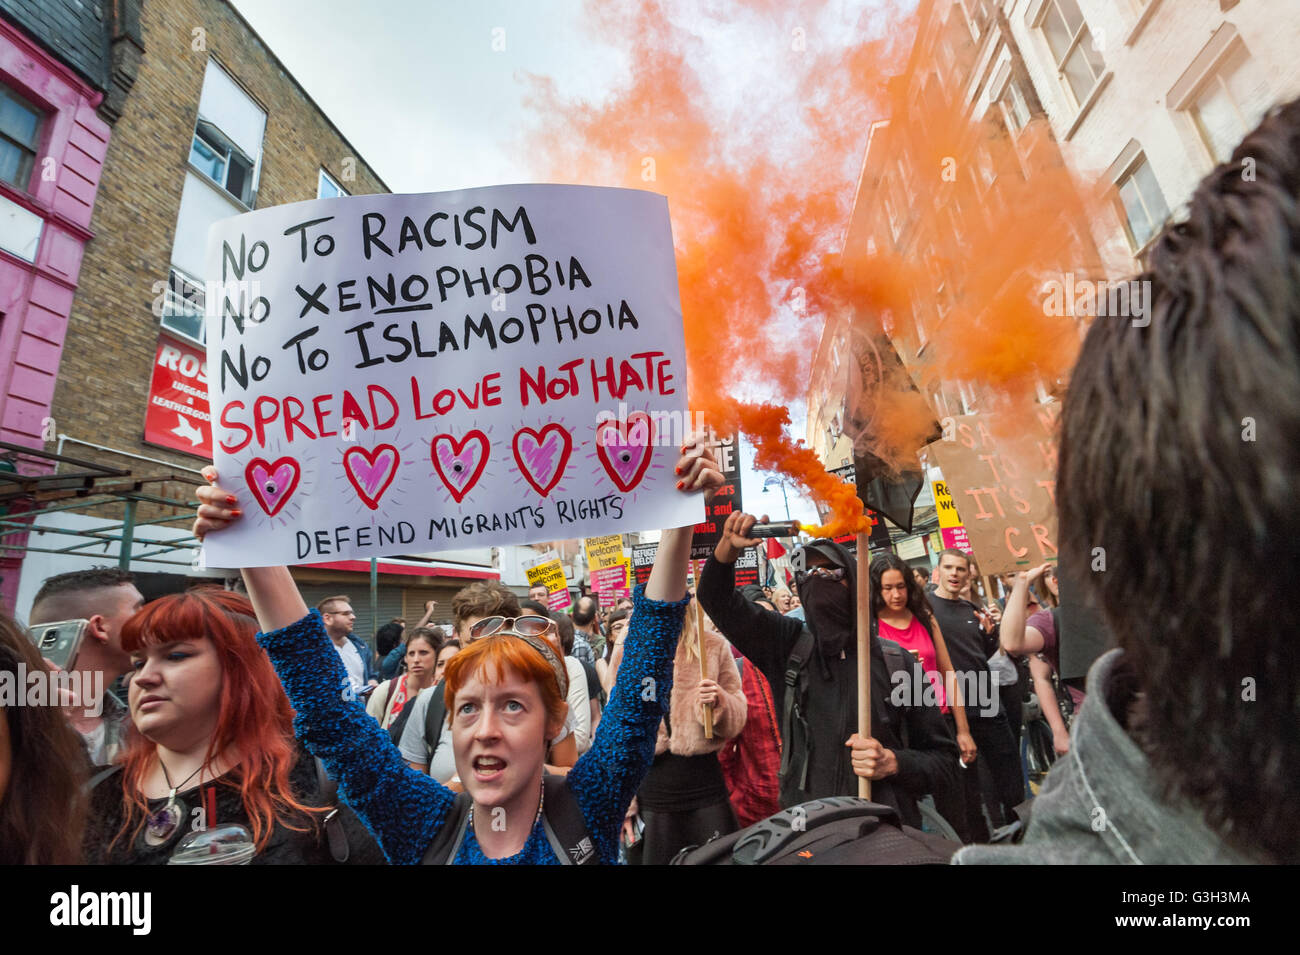 London, UK. June 24th 2016.  A woman holds up a poster in front of flares set off on the long march from Altab Ali Park to the offices of News International on the day after the UK voted to leave the EU. They were protesting against racism, for migrant rights and against fascist violence and argue that migration and immigrants have been attacked and scapegoated not only by both Remain and Leave campaigns but by mainstream parties and media over more than 20 years, stoking up hatred by insisting immigrants are a 'problem'. Peter Marshall/Alamy Live News Stock Photo